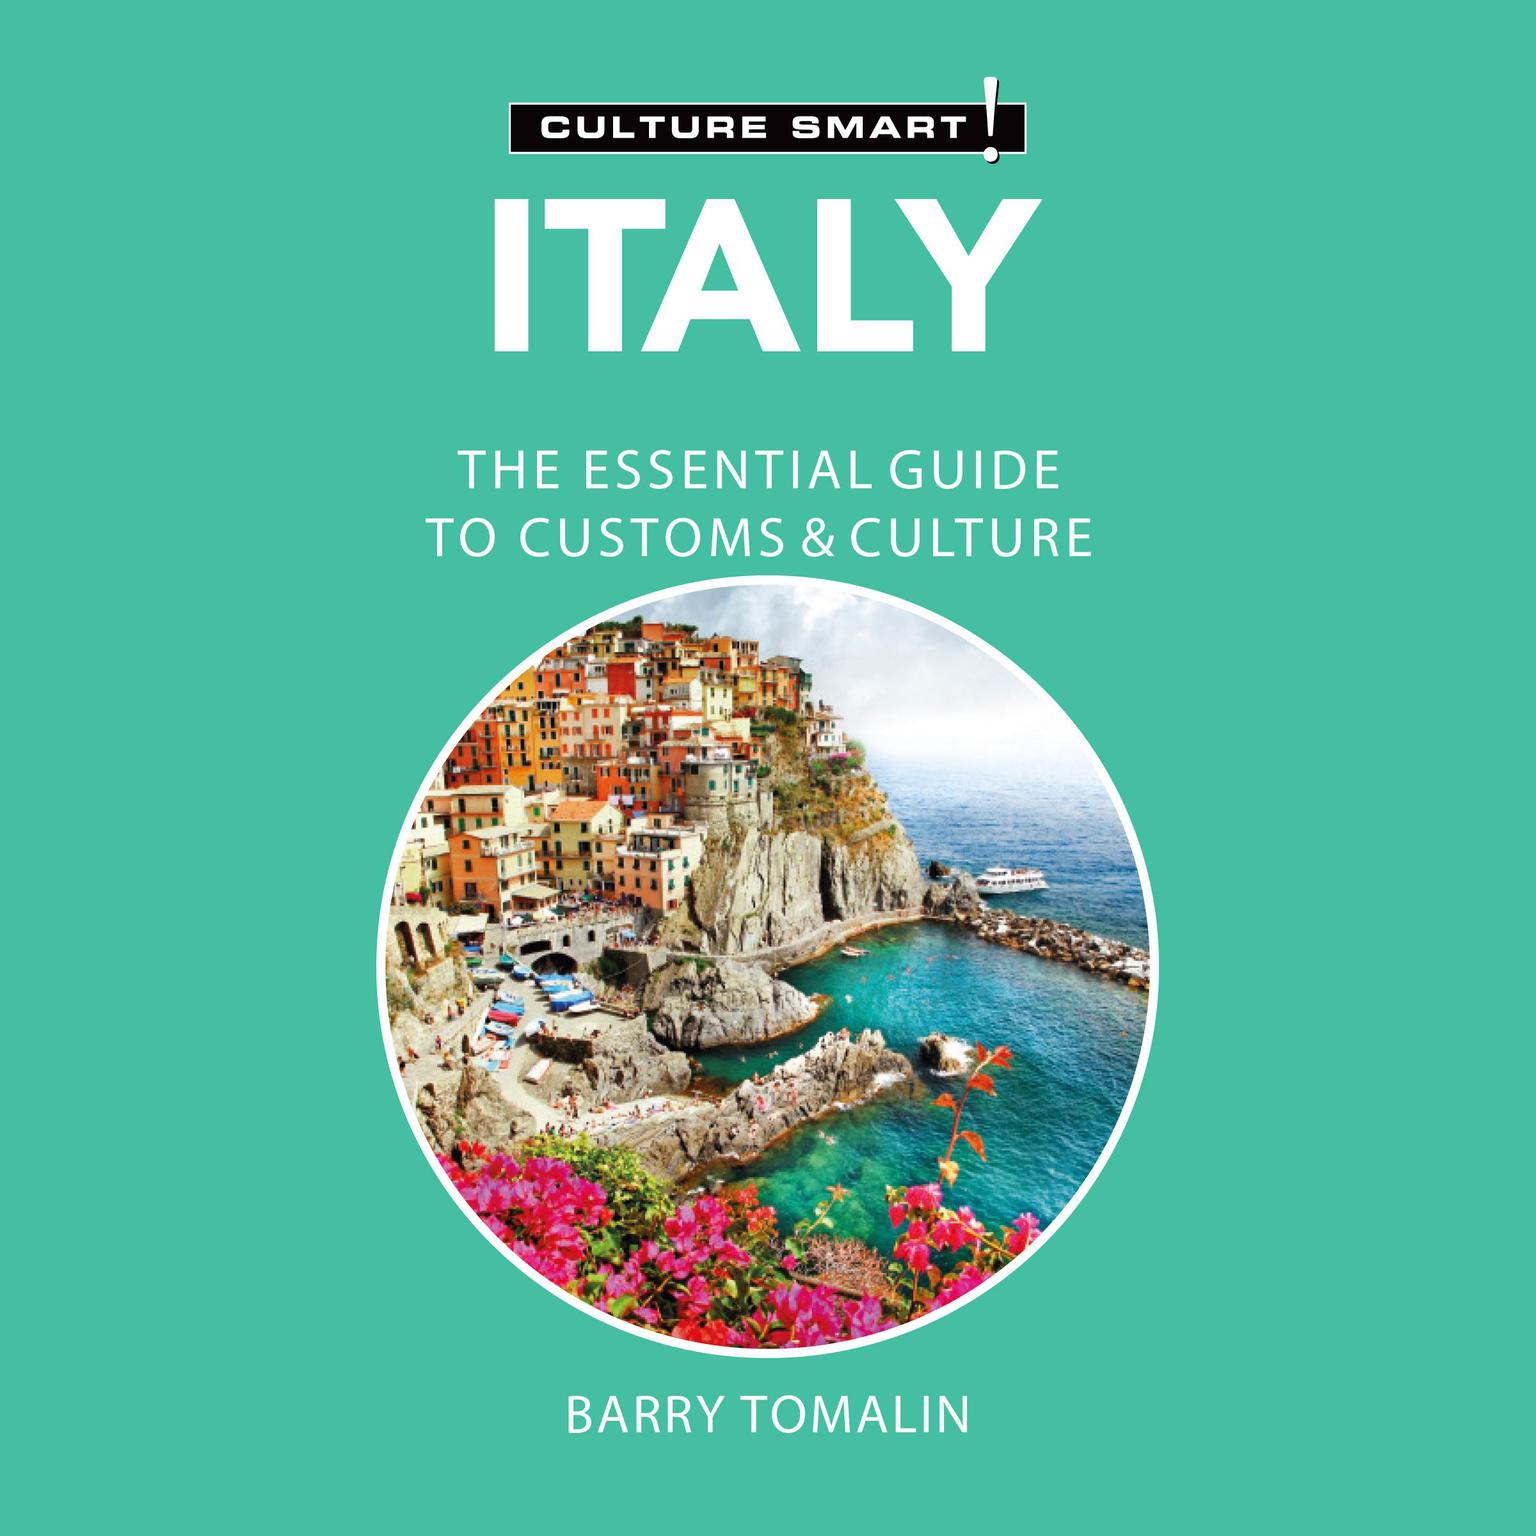 Italy - Culture Smart!: The Essential Guide to Customs & Culture Audiobook, by Barry Tomalin